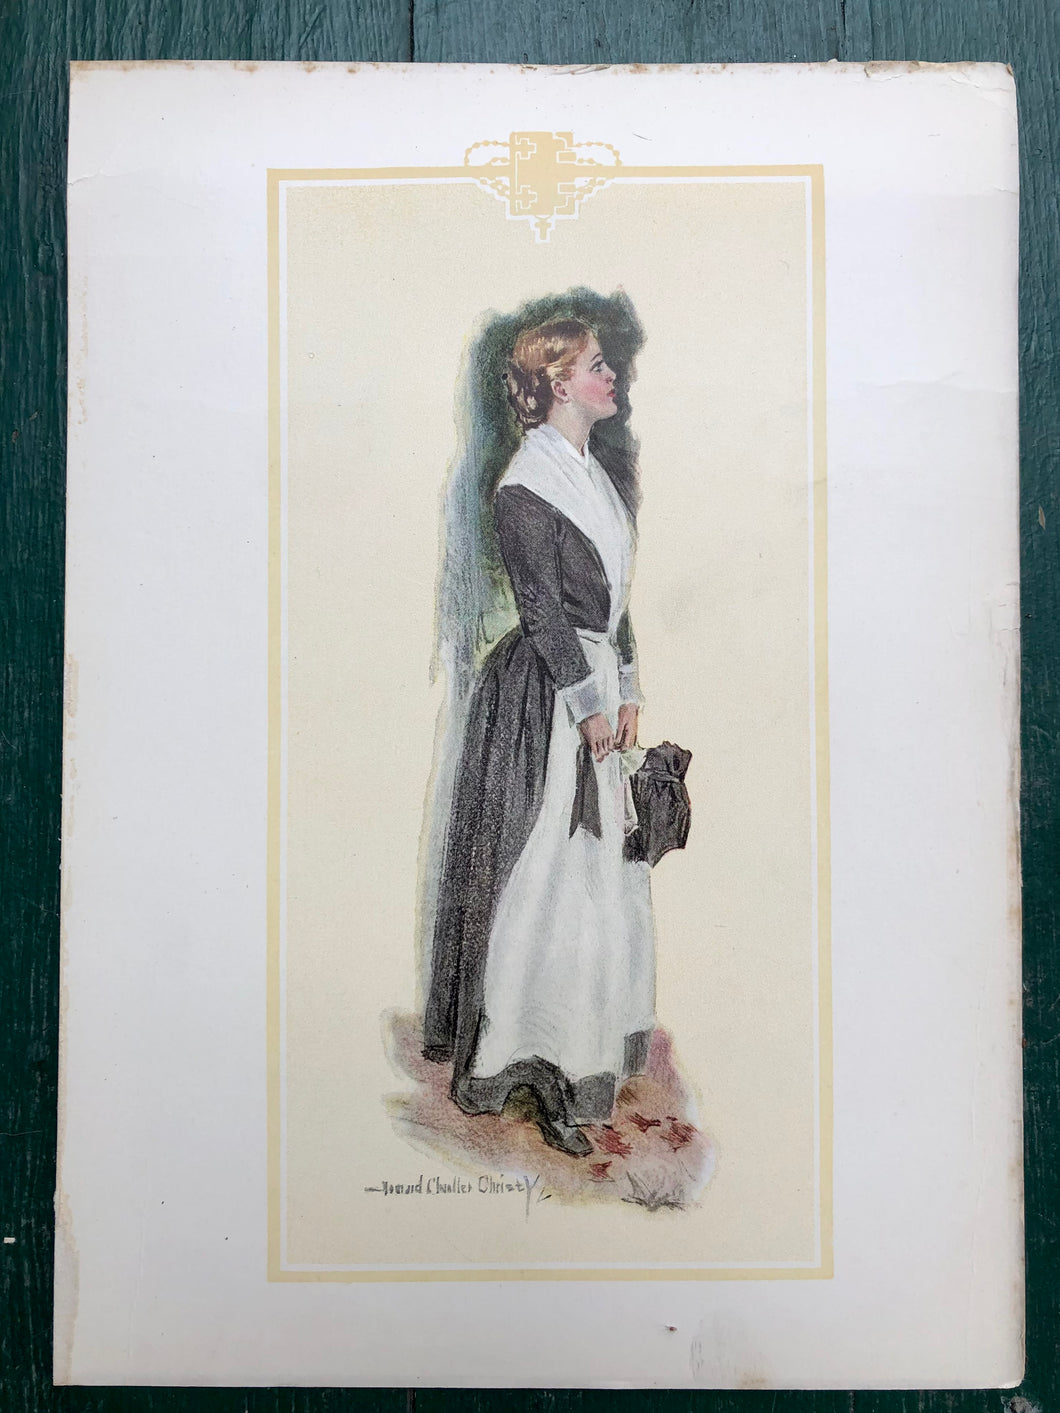 Print from “The Christy Girl” drawn by Howard Chandler Christy